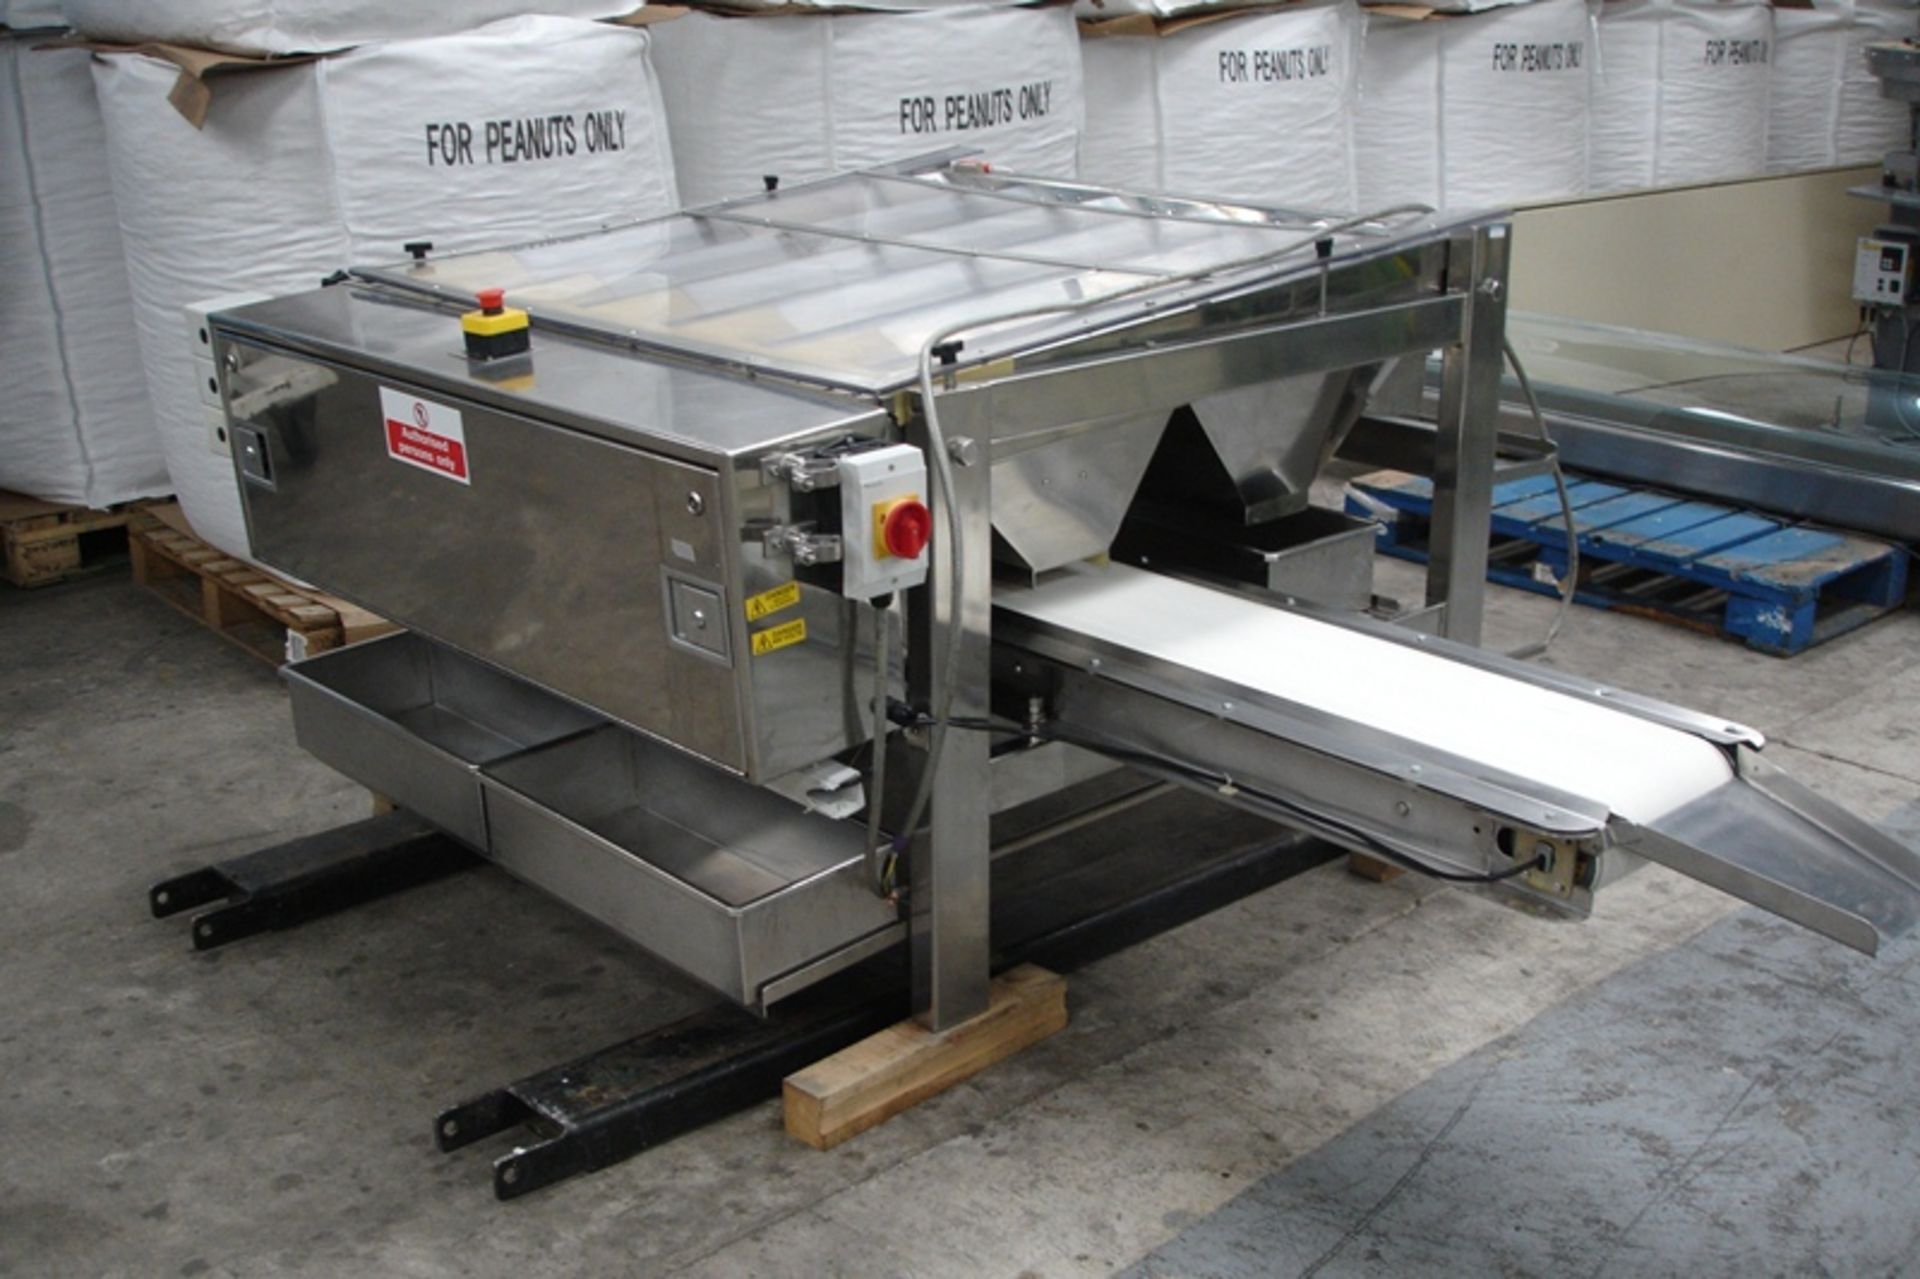 Fully S/S food grade 5 Lane Sizing / Grading Machine With Outfeed Conveyor - Image 7 of 7